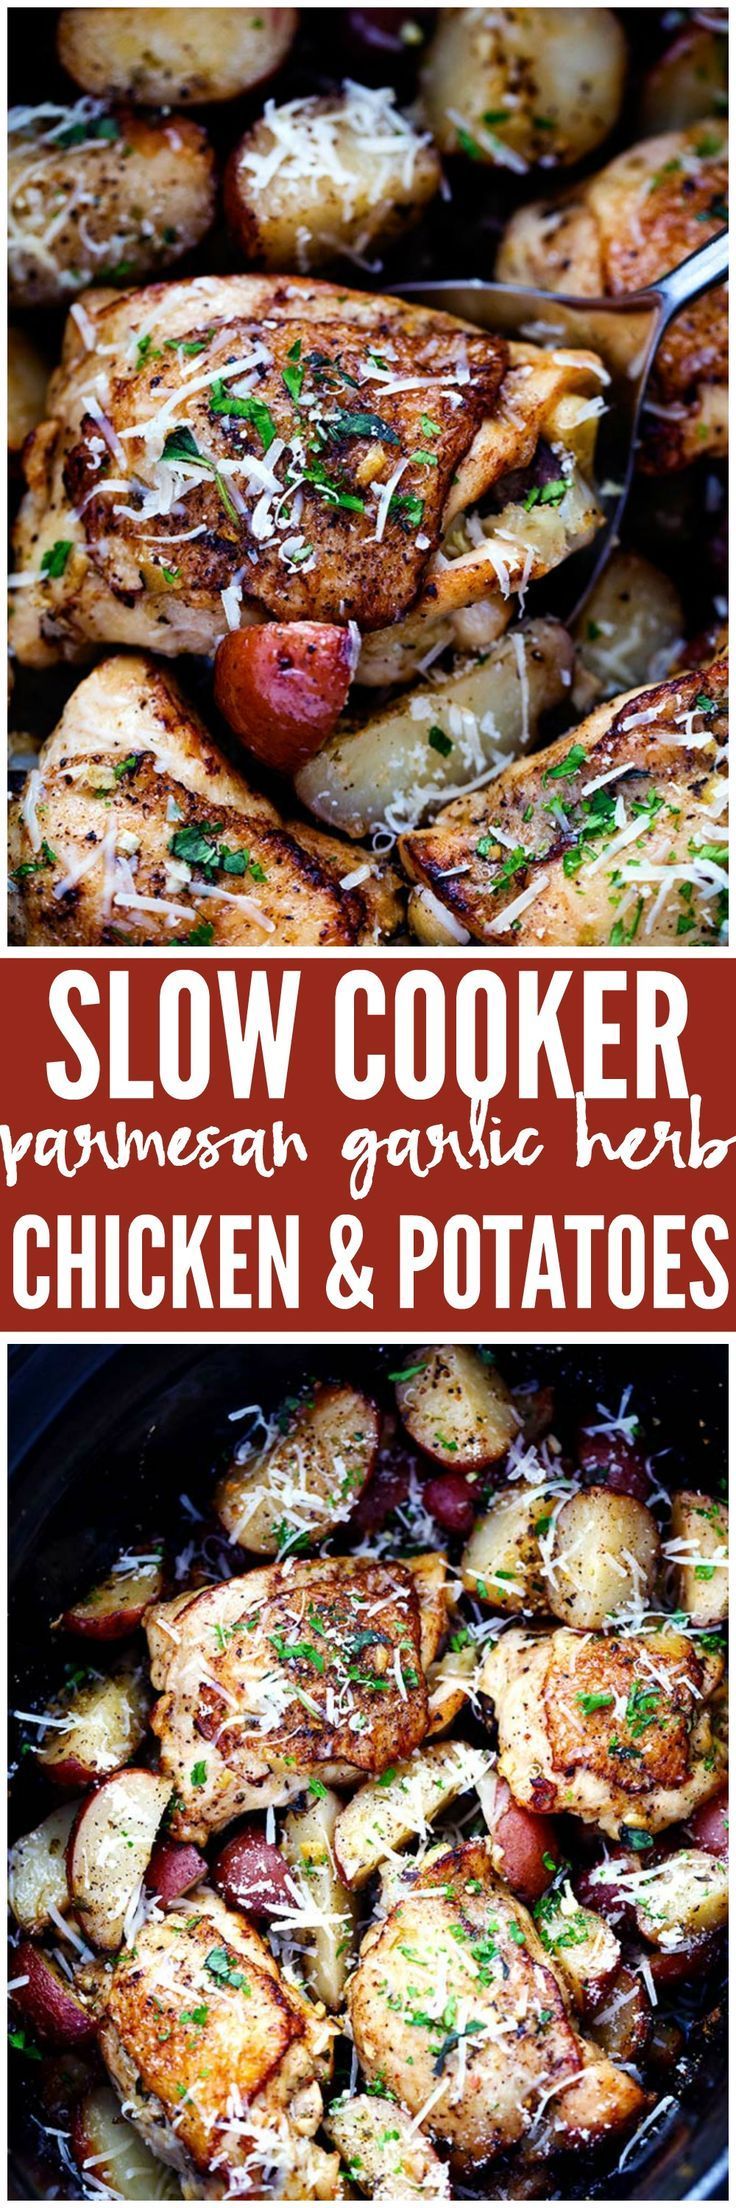 Slow Cooker Parmesan Garlic Herb Chicken is such an easy meal that is packed with amazing flavor! The potatoes cook to tender